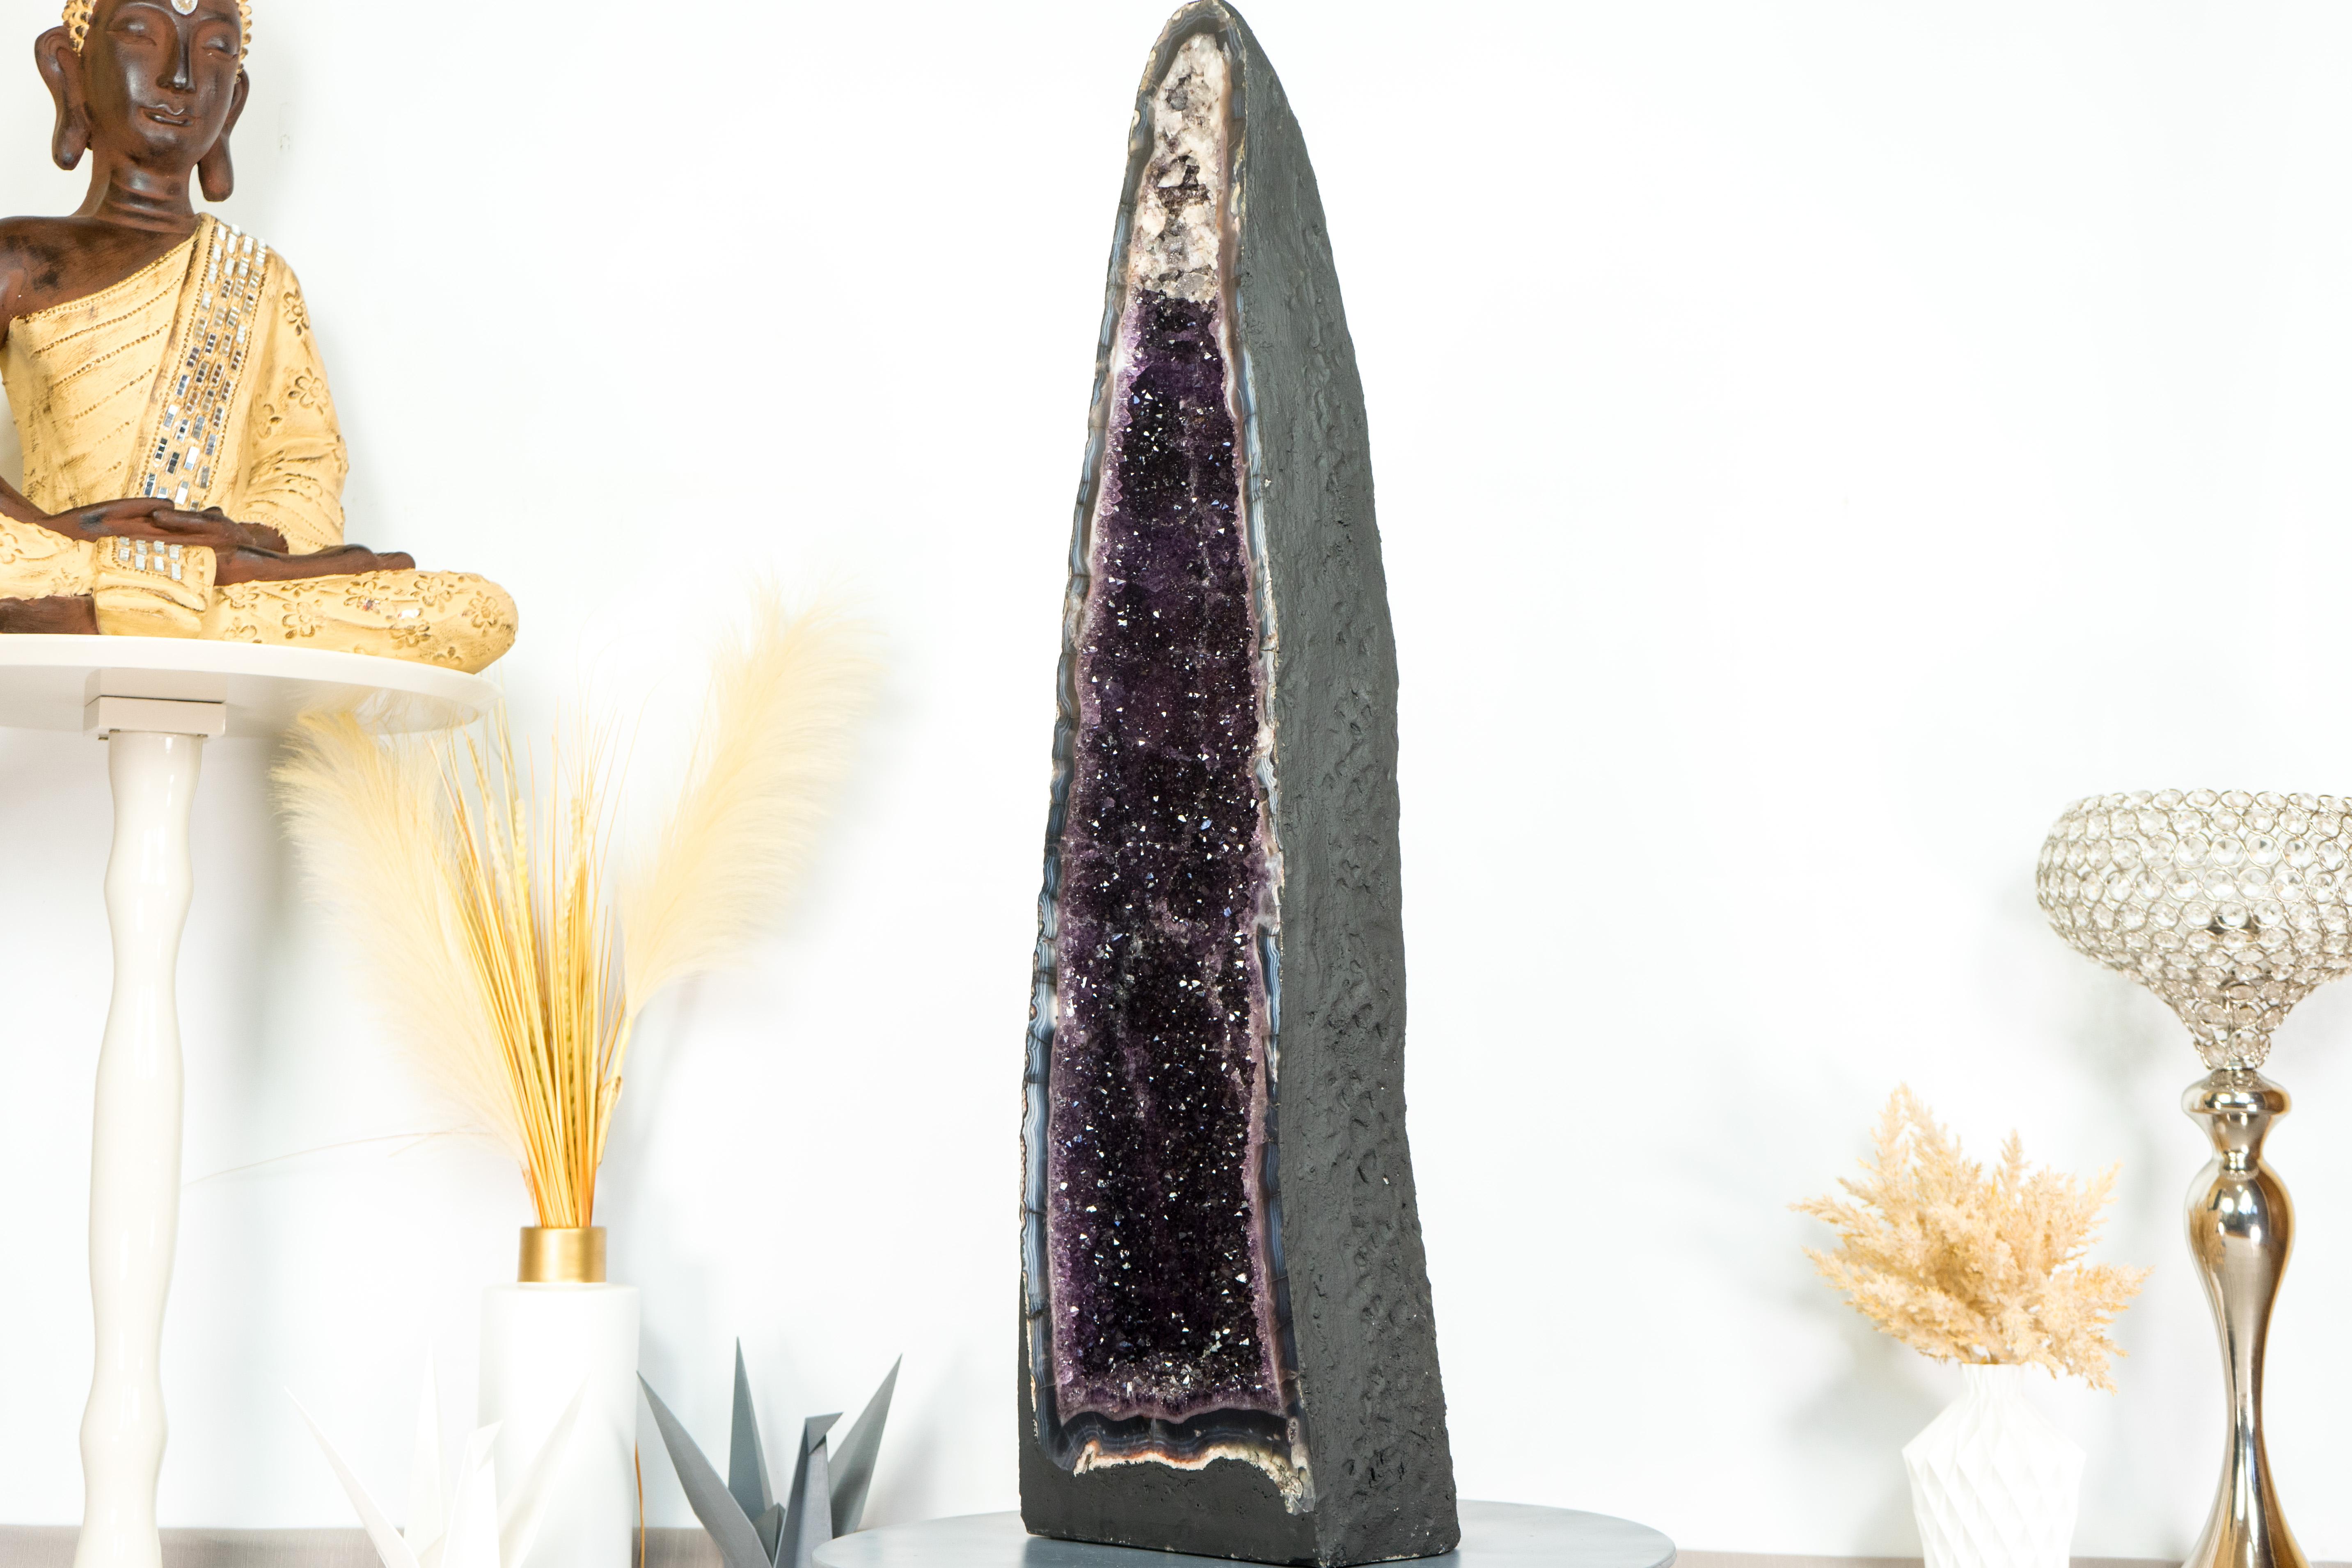 Deep Purple Amethyst Cathedral Geode, with Lace Agate and Calcite, Large & Tall For Sale 3